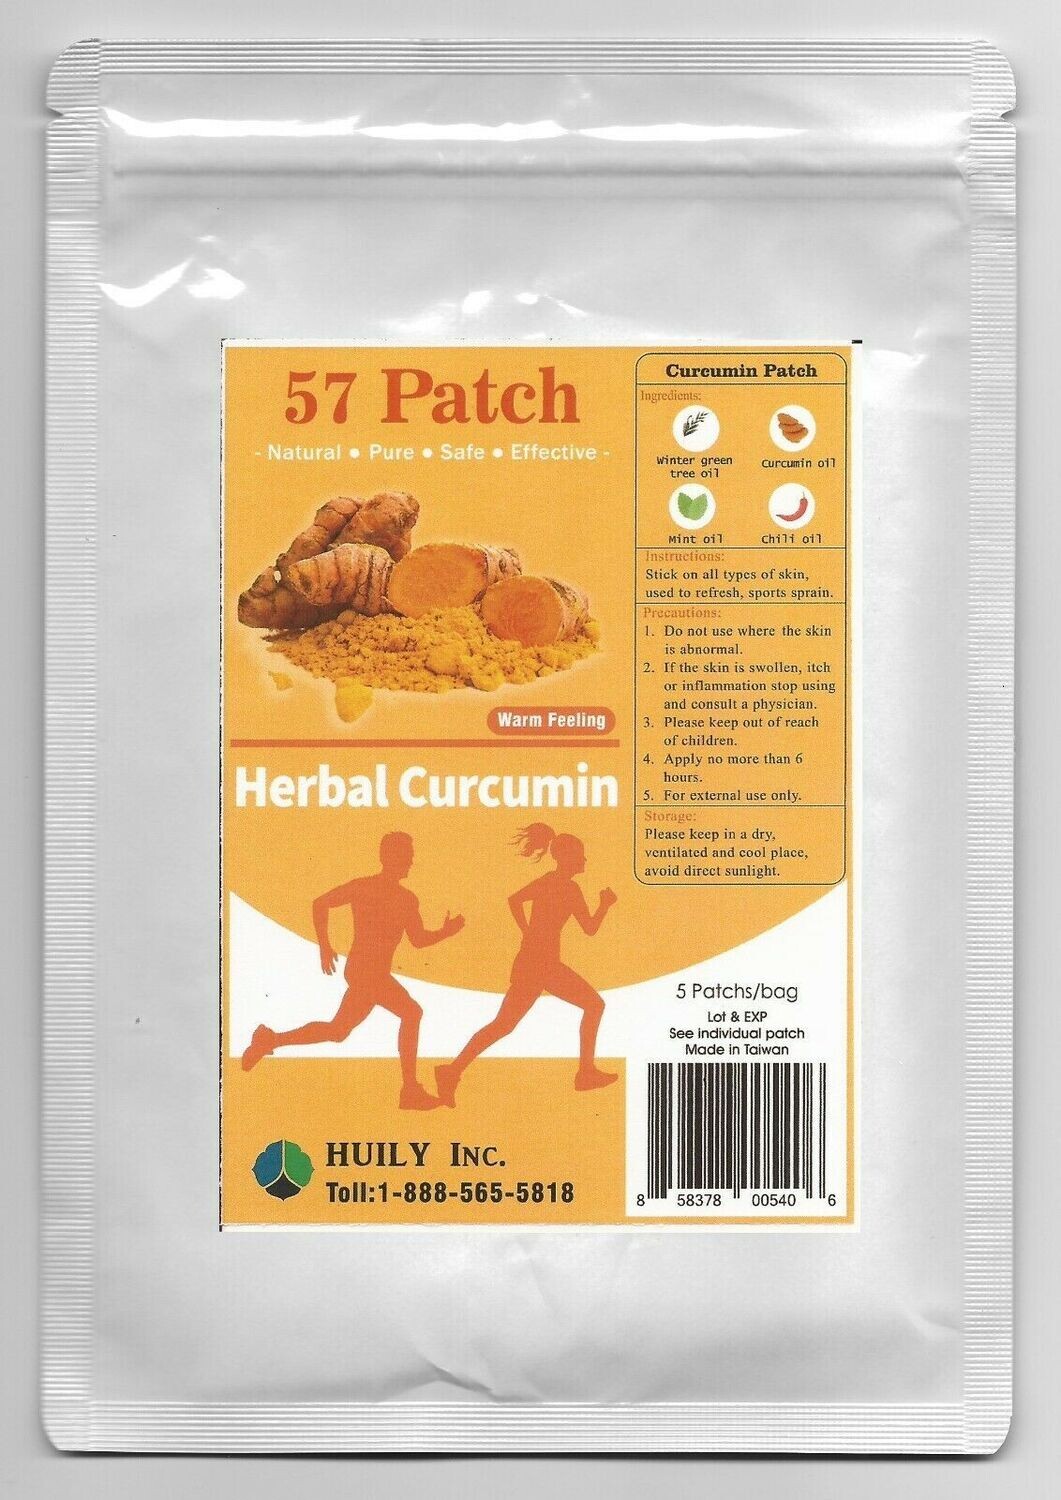 Meditalent - Huily 57 Herbal Curcumin Herbal Patch - 5 Pack (25 Patches)